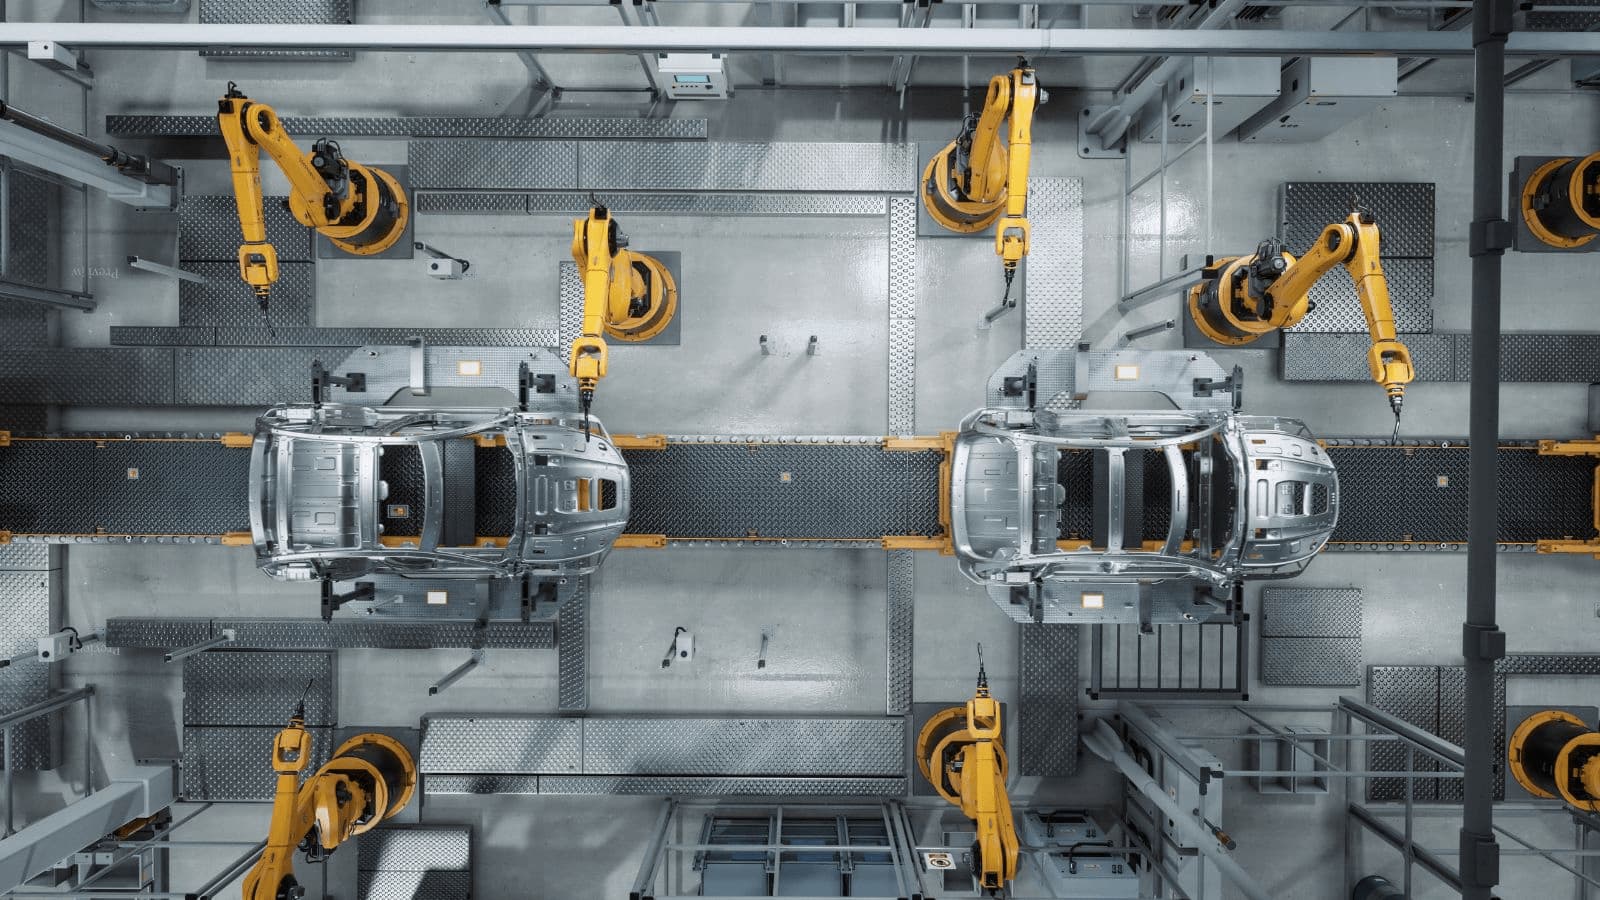 A car on an assembly line represents discrete in discrete vs process manufacturing.